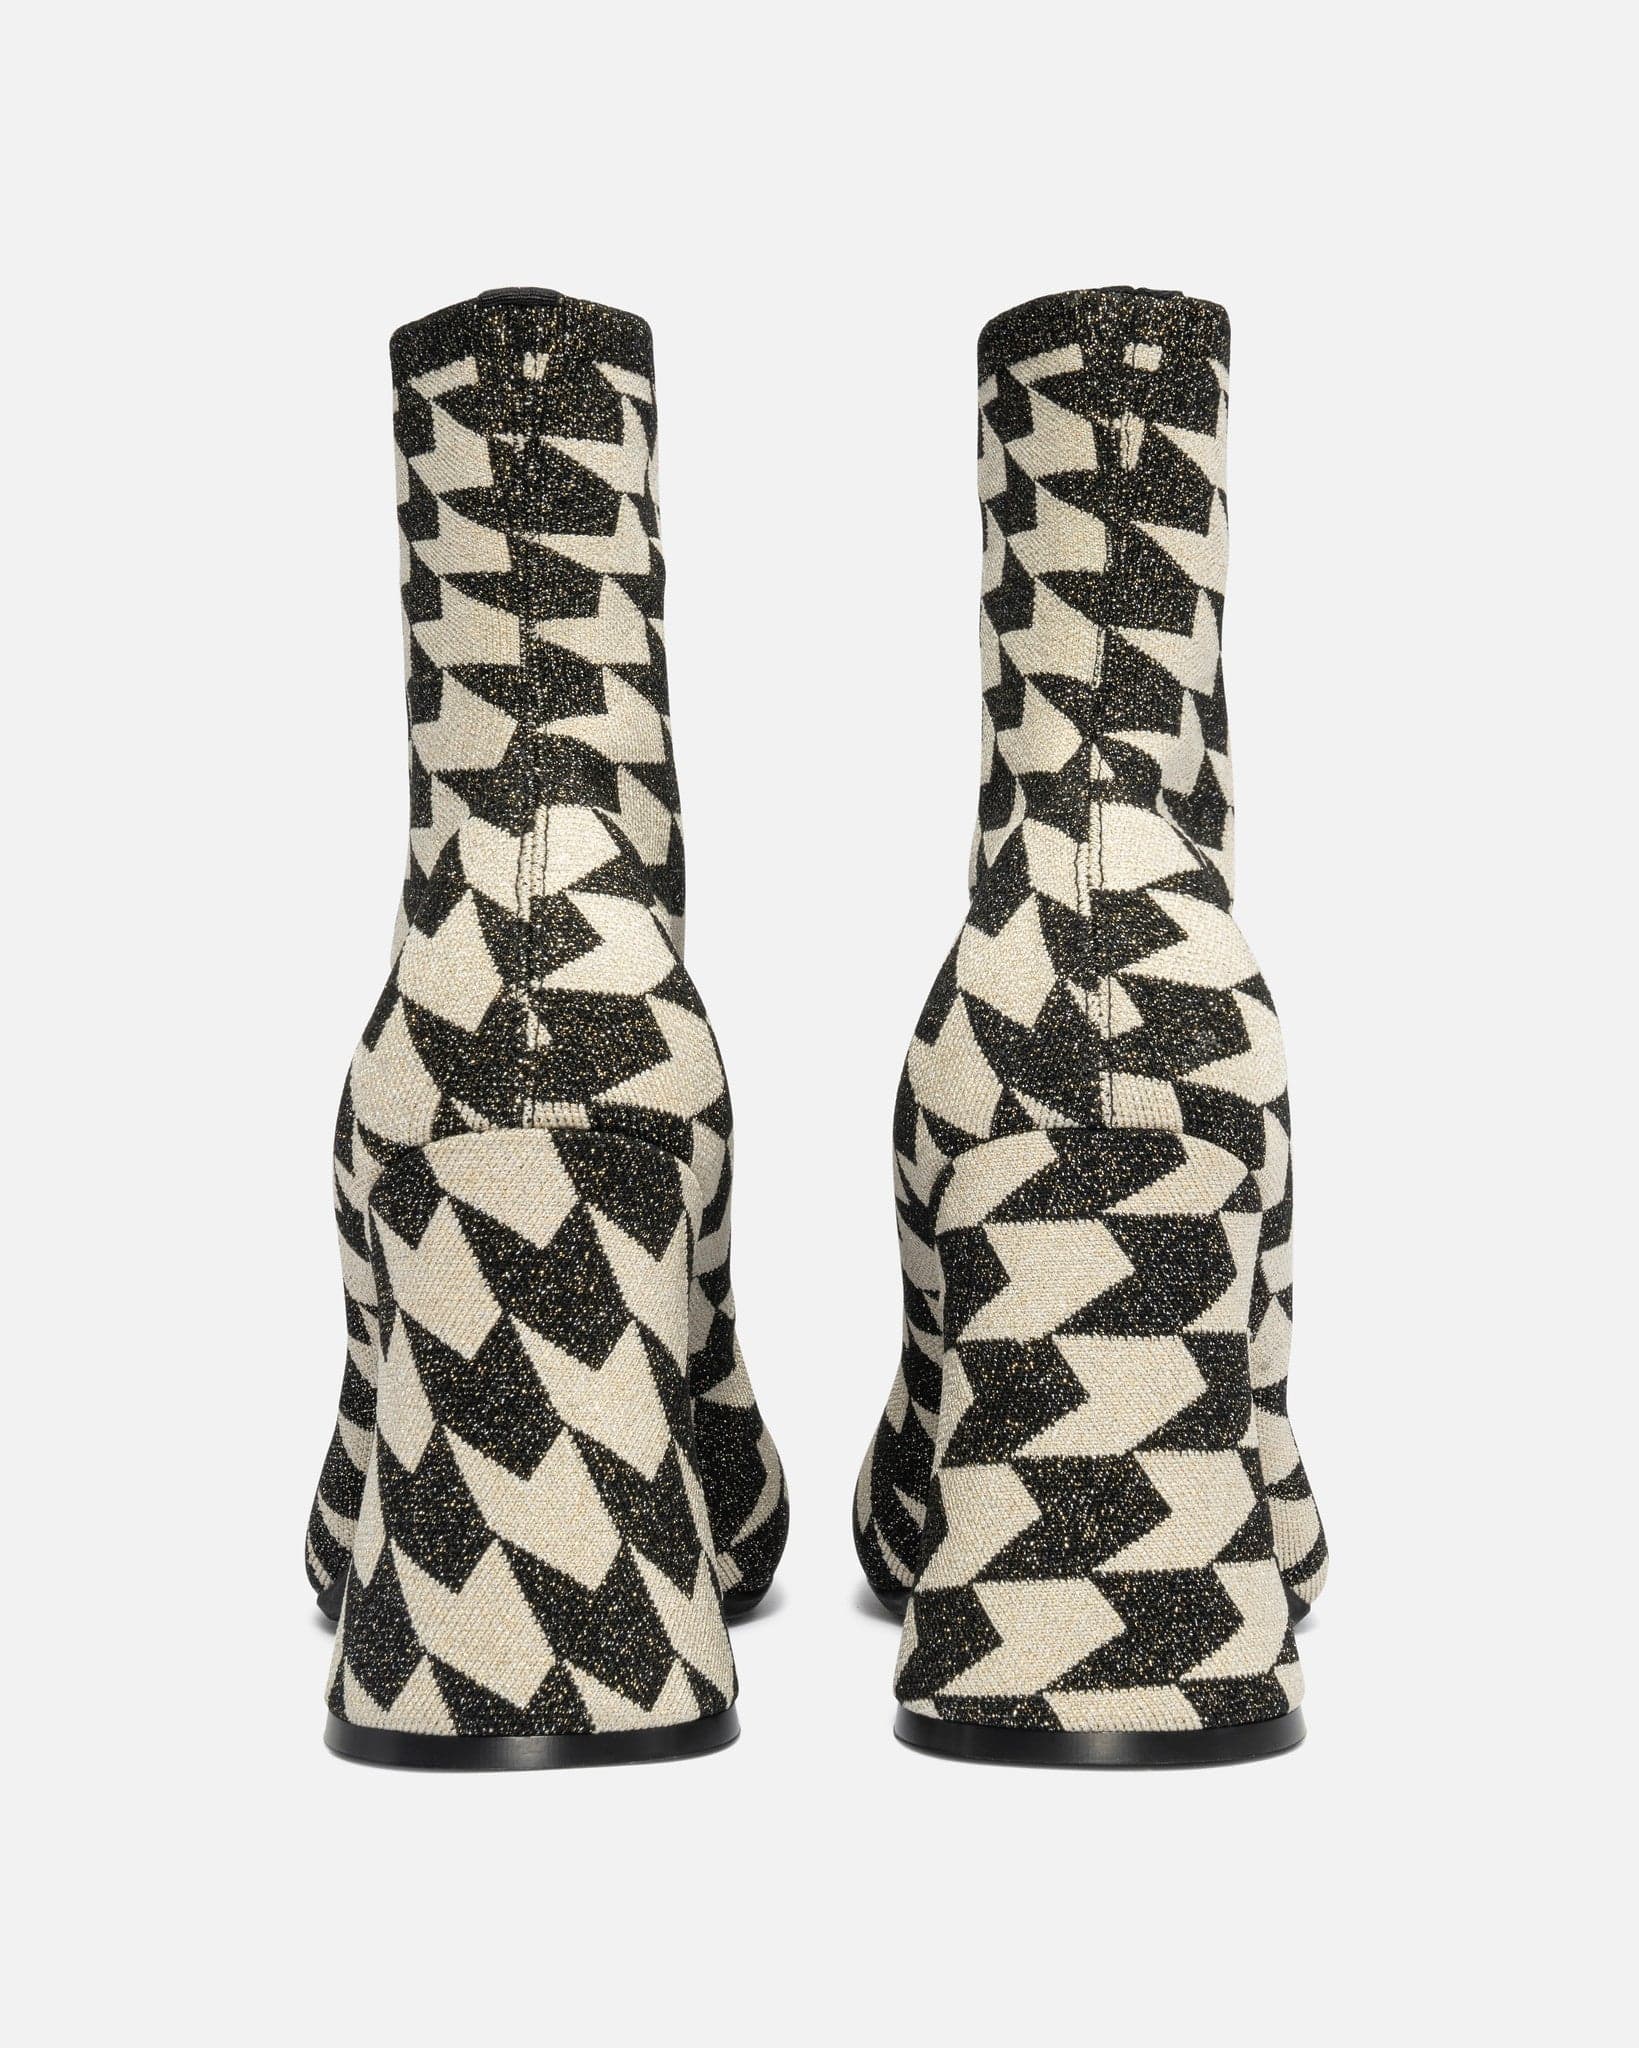 Marni Women Boots Jacquard Lurex Ankle Boots in Black/Cream